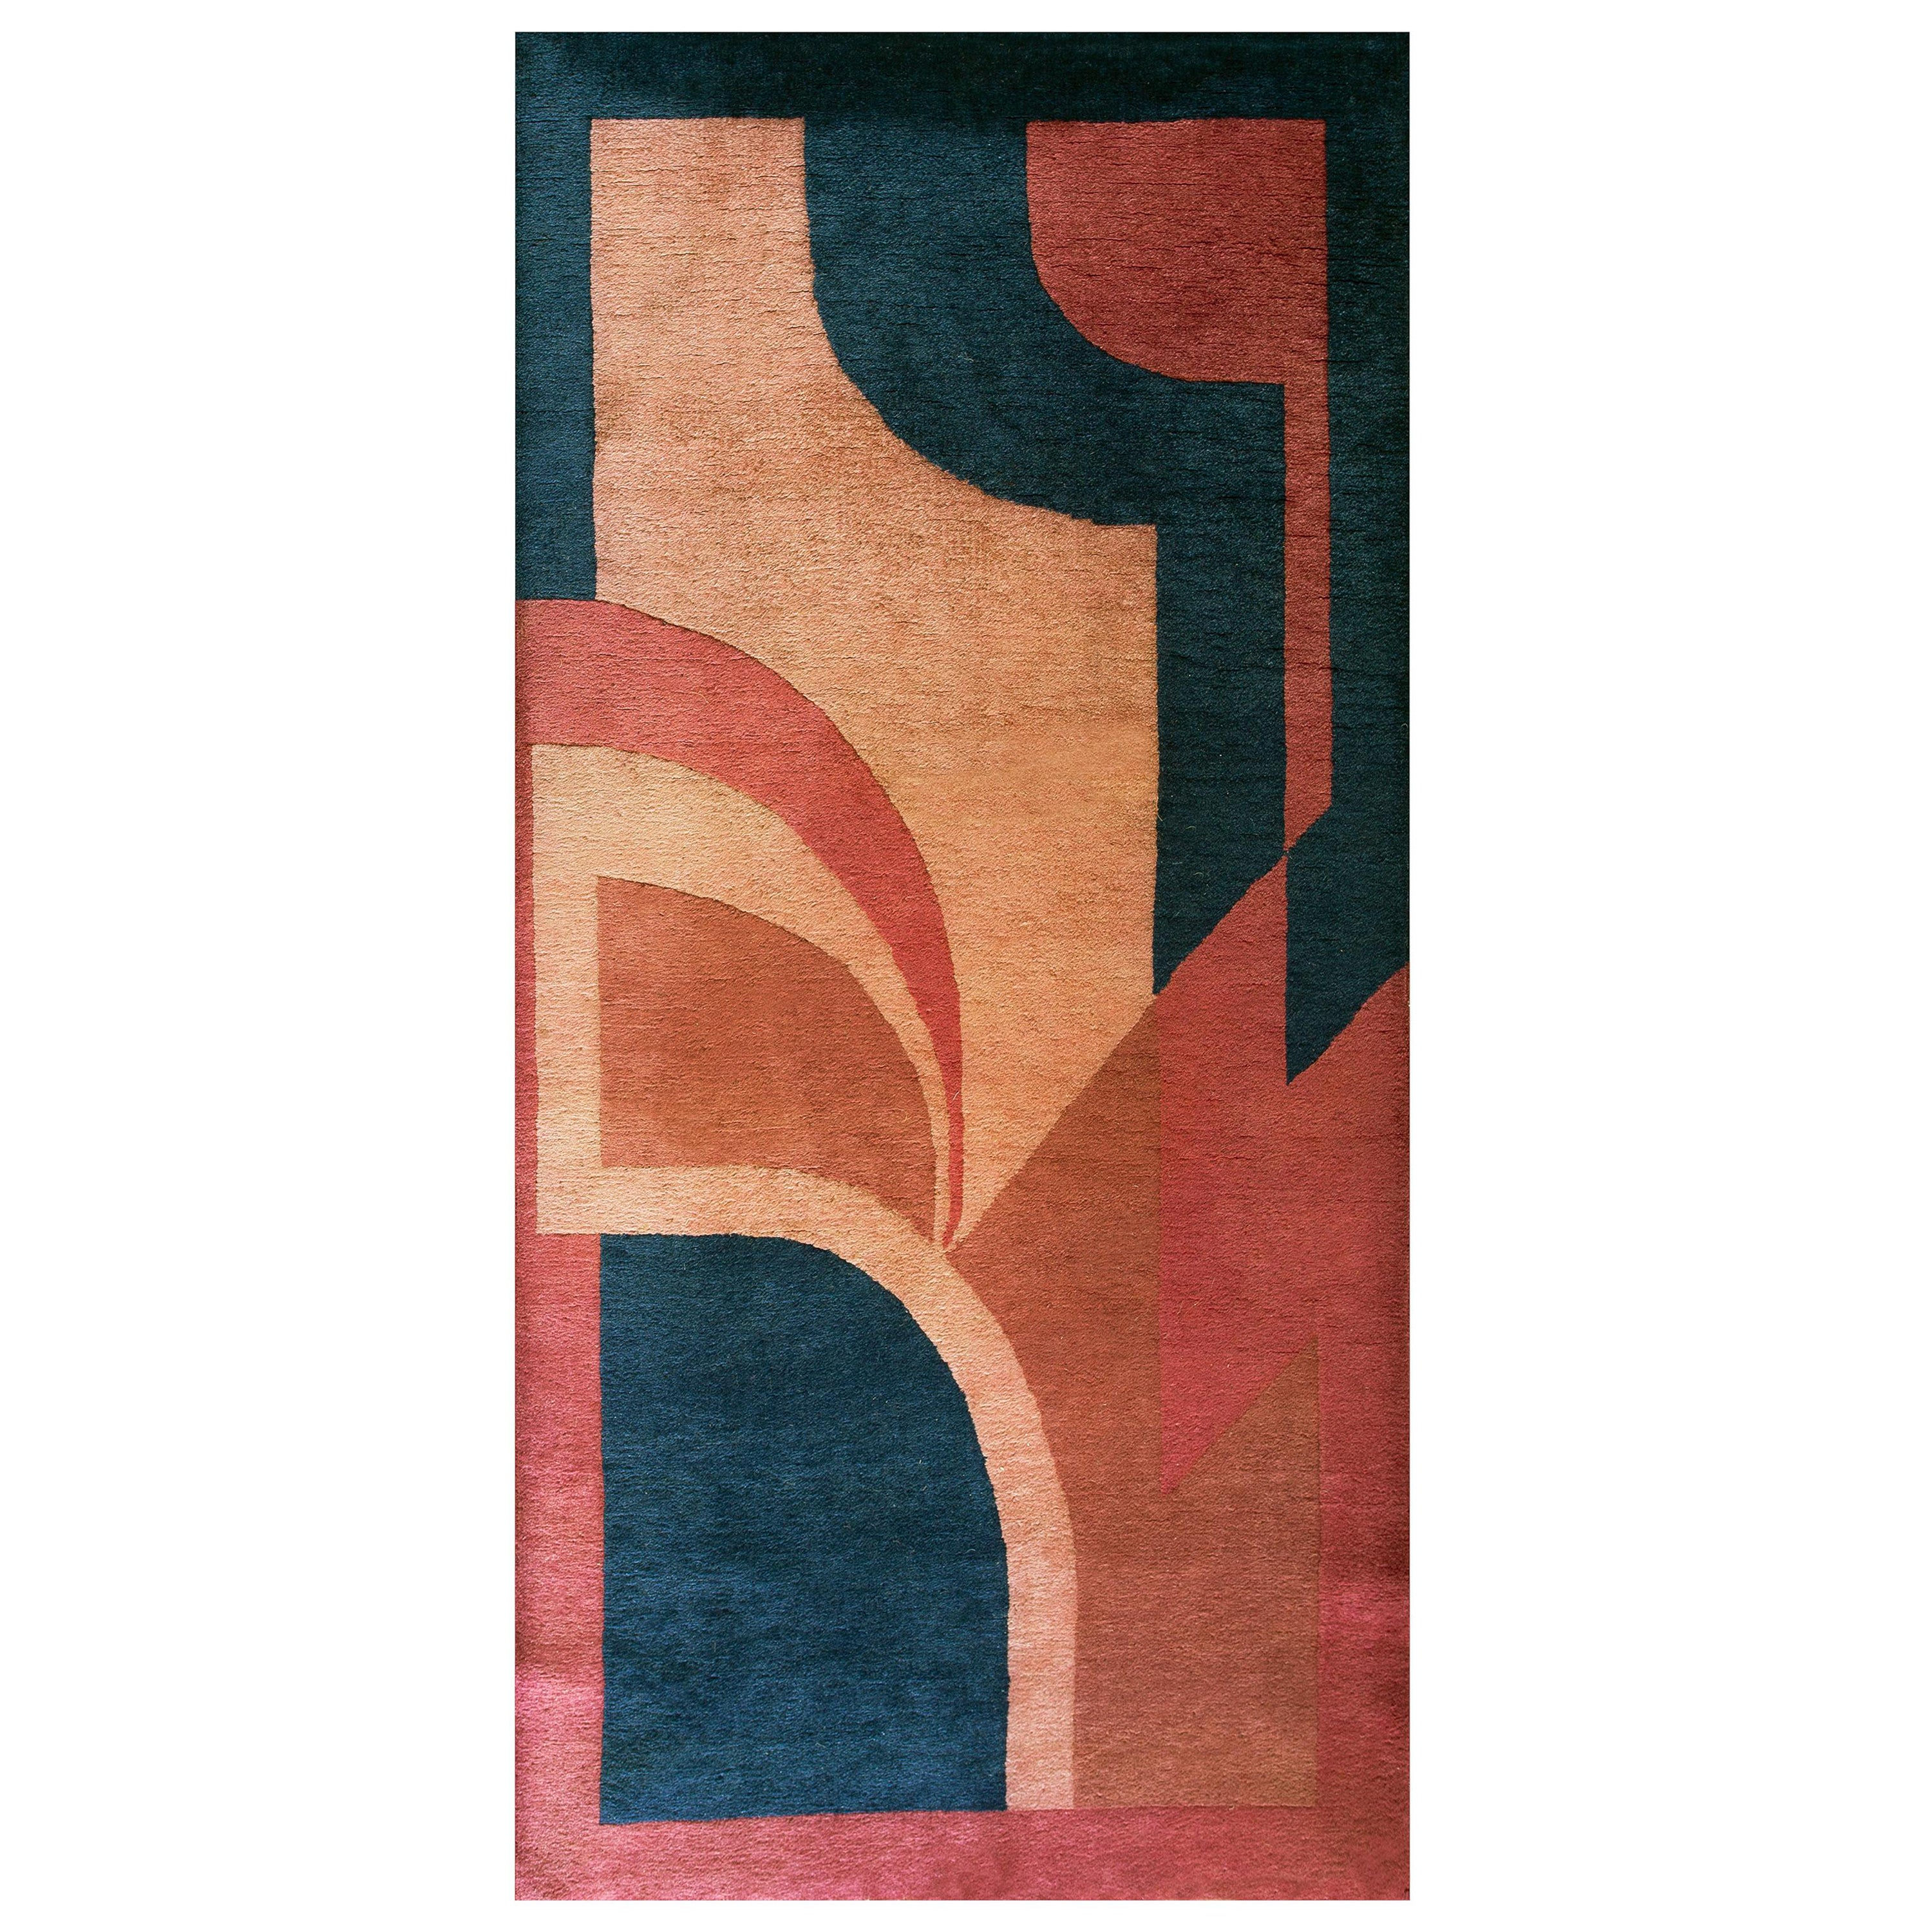 1920s Chinese Art Deco Carpet with Modernist Design (2'10'' x 5'9'' - 86 x 175) For Sale